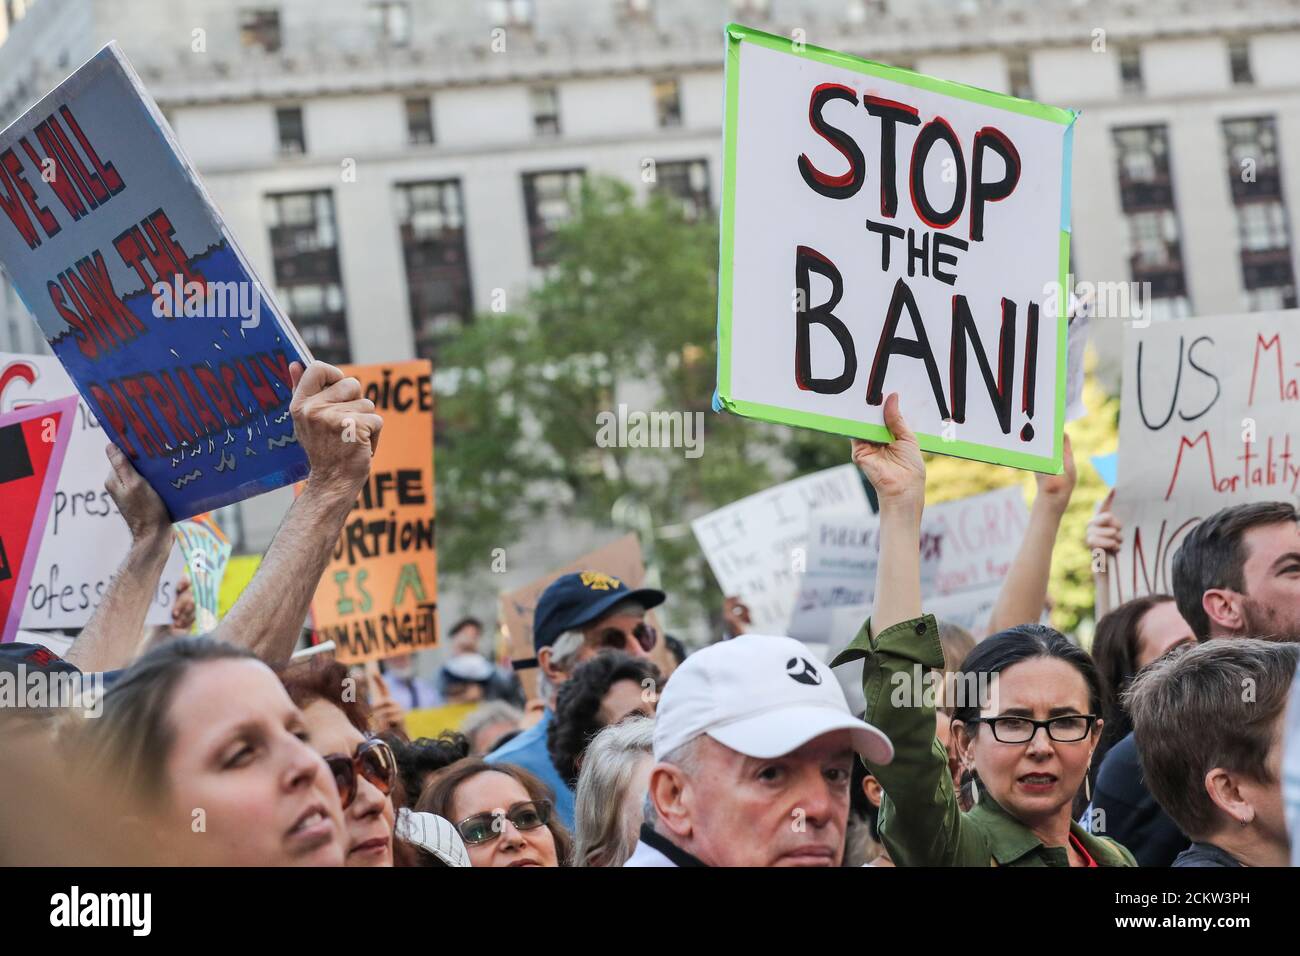 Abortion-rights campaigners attend a rally against new restrictions on abortion passed by legislatures in eight states including Alabama and Georgia, in New York City, U.S., May 21, 2019. REUTERS/Jeenah Moon Stock Photo